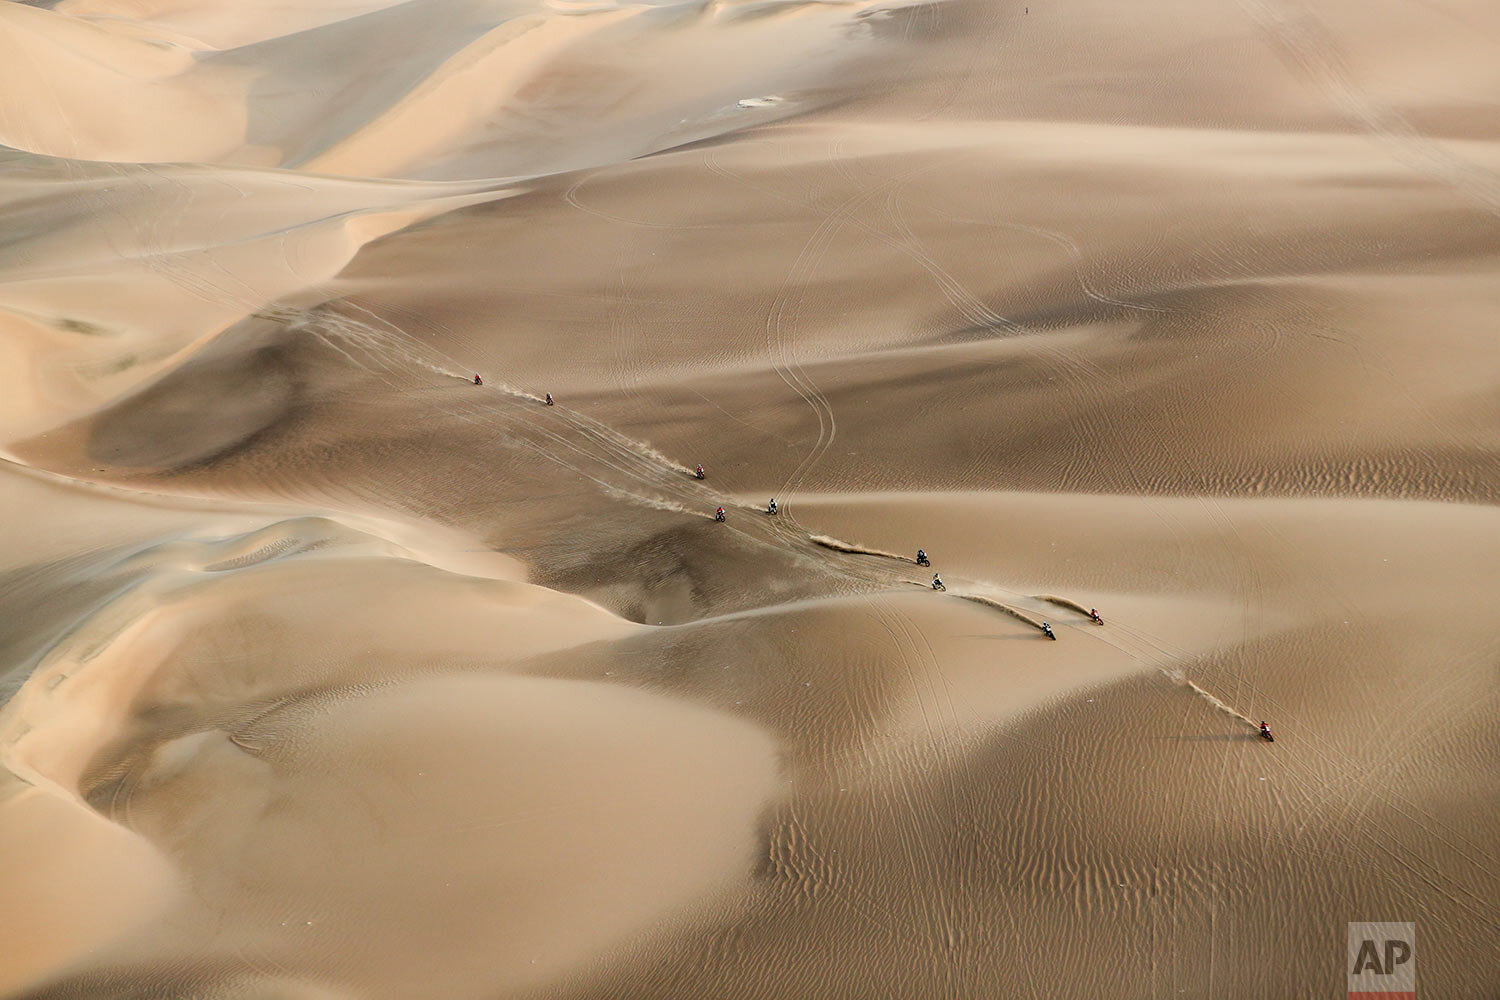  Competitors ride their motorcycles across the dunes during stage nine of the Dakar Rally in Pisco, Peru, on Jan. 16, 2019. (AP Photo/Ricardo Mazalan) 